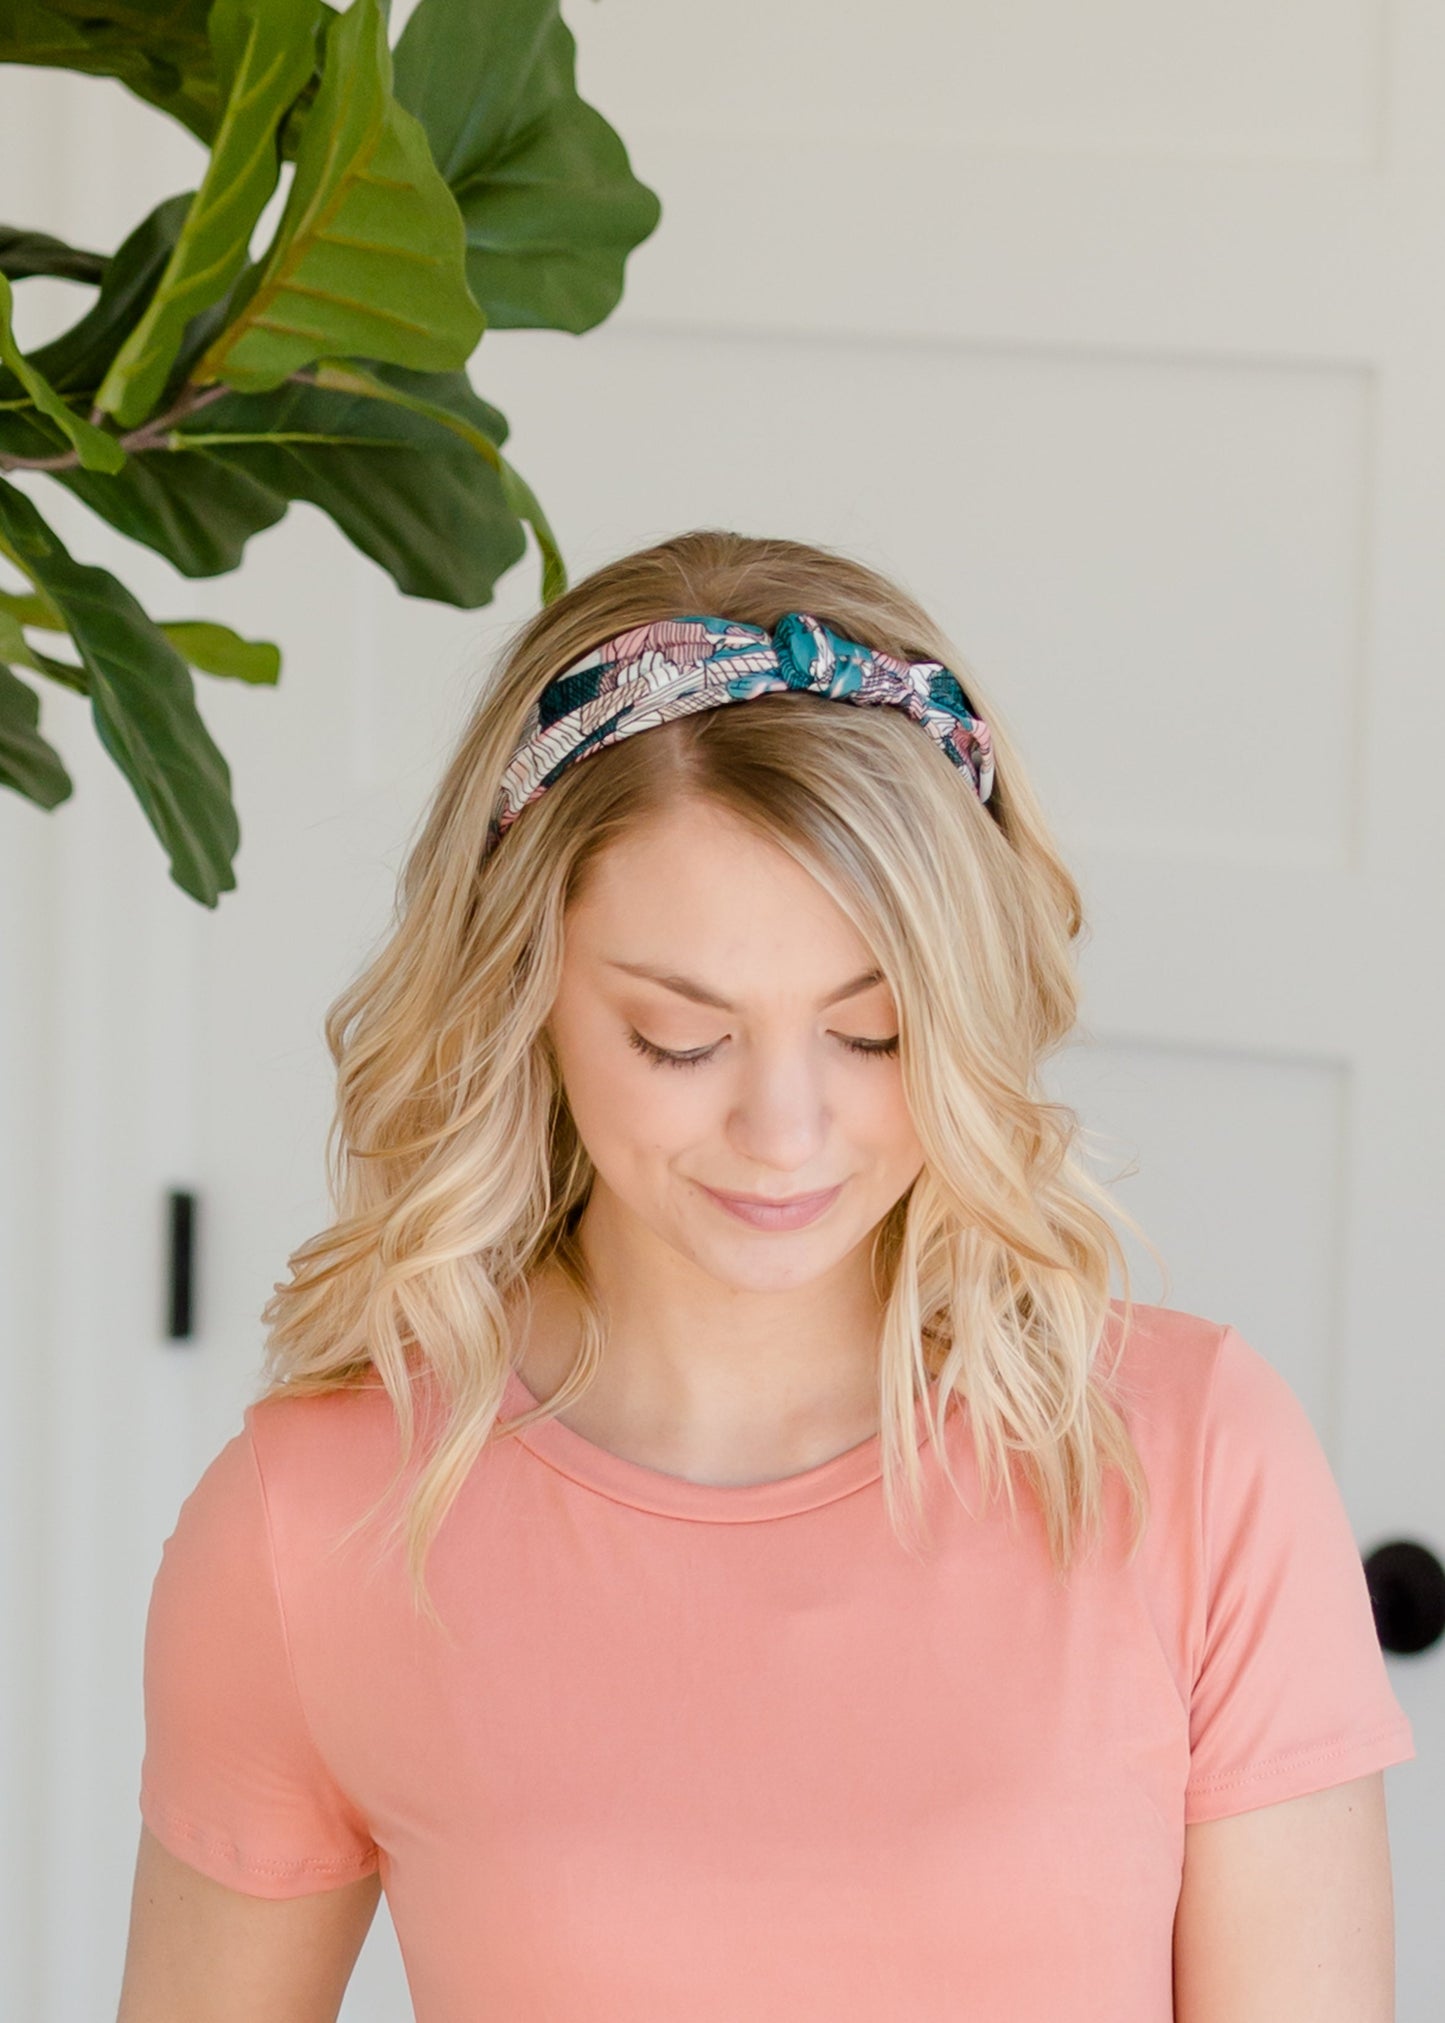 Teal + Pink Geometric Knotted Headband Accessories